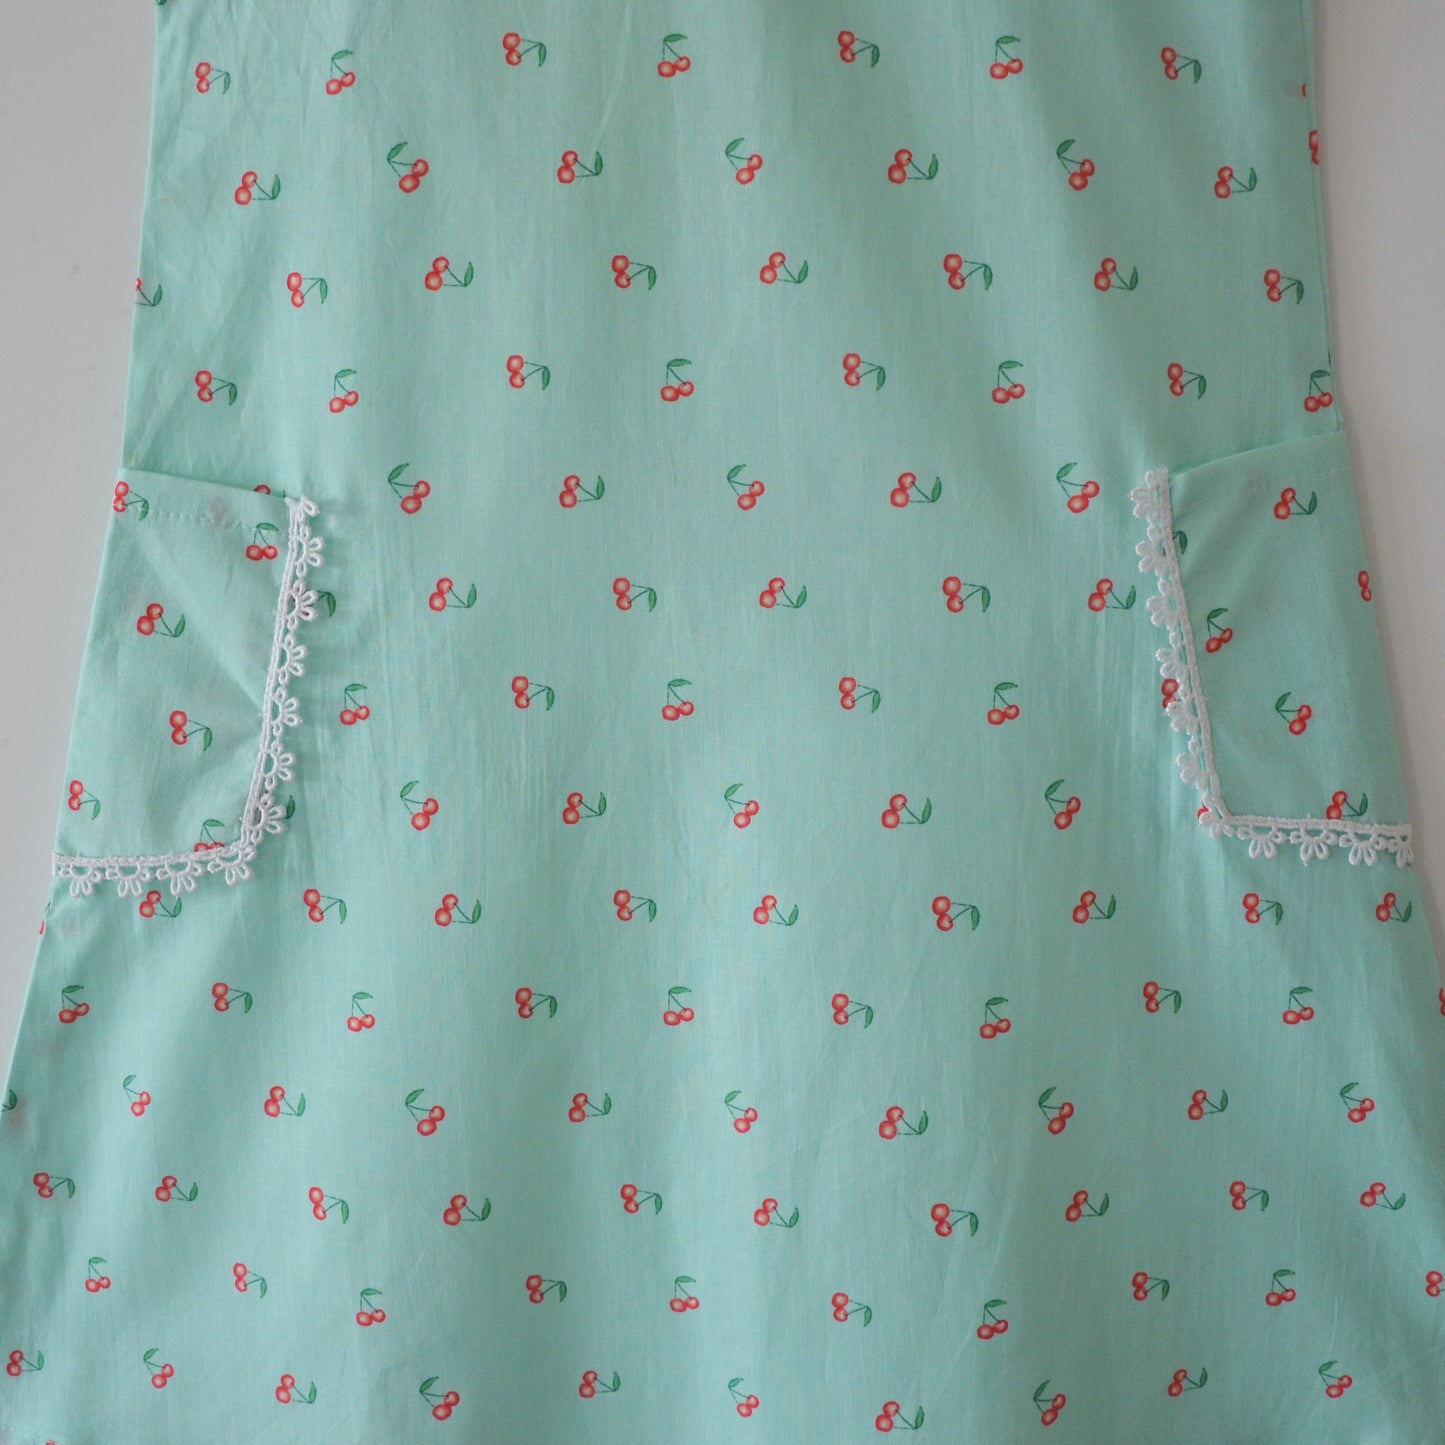 Madeline dress in cherry print with pockets - Green